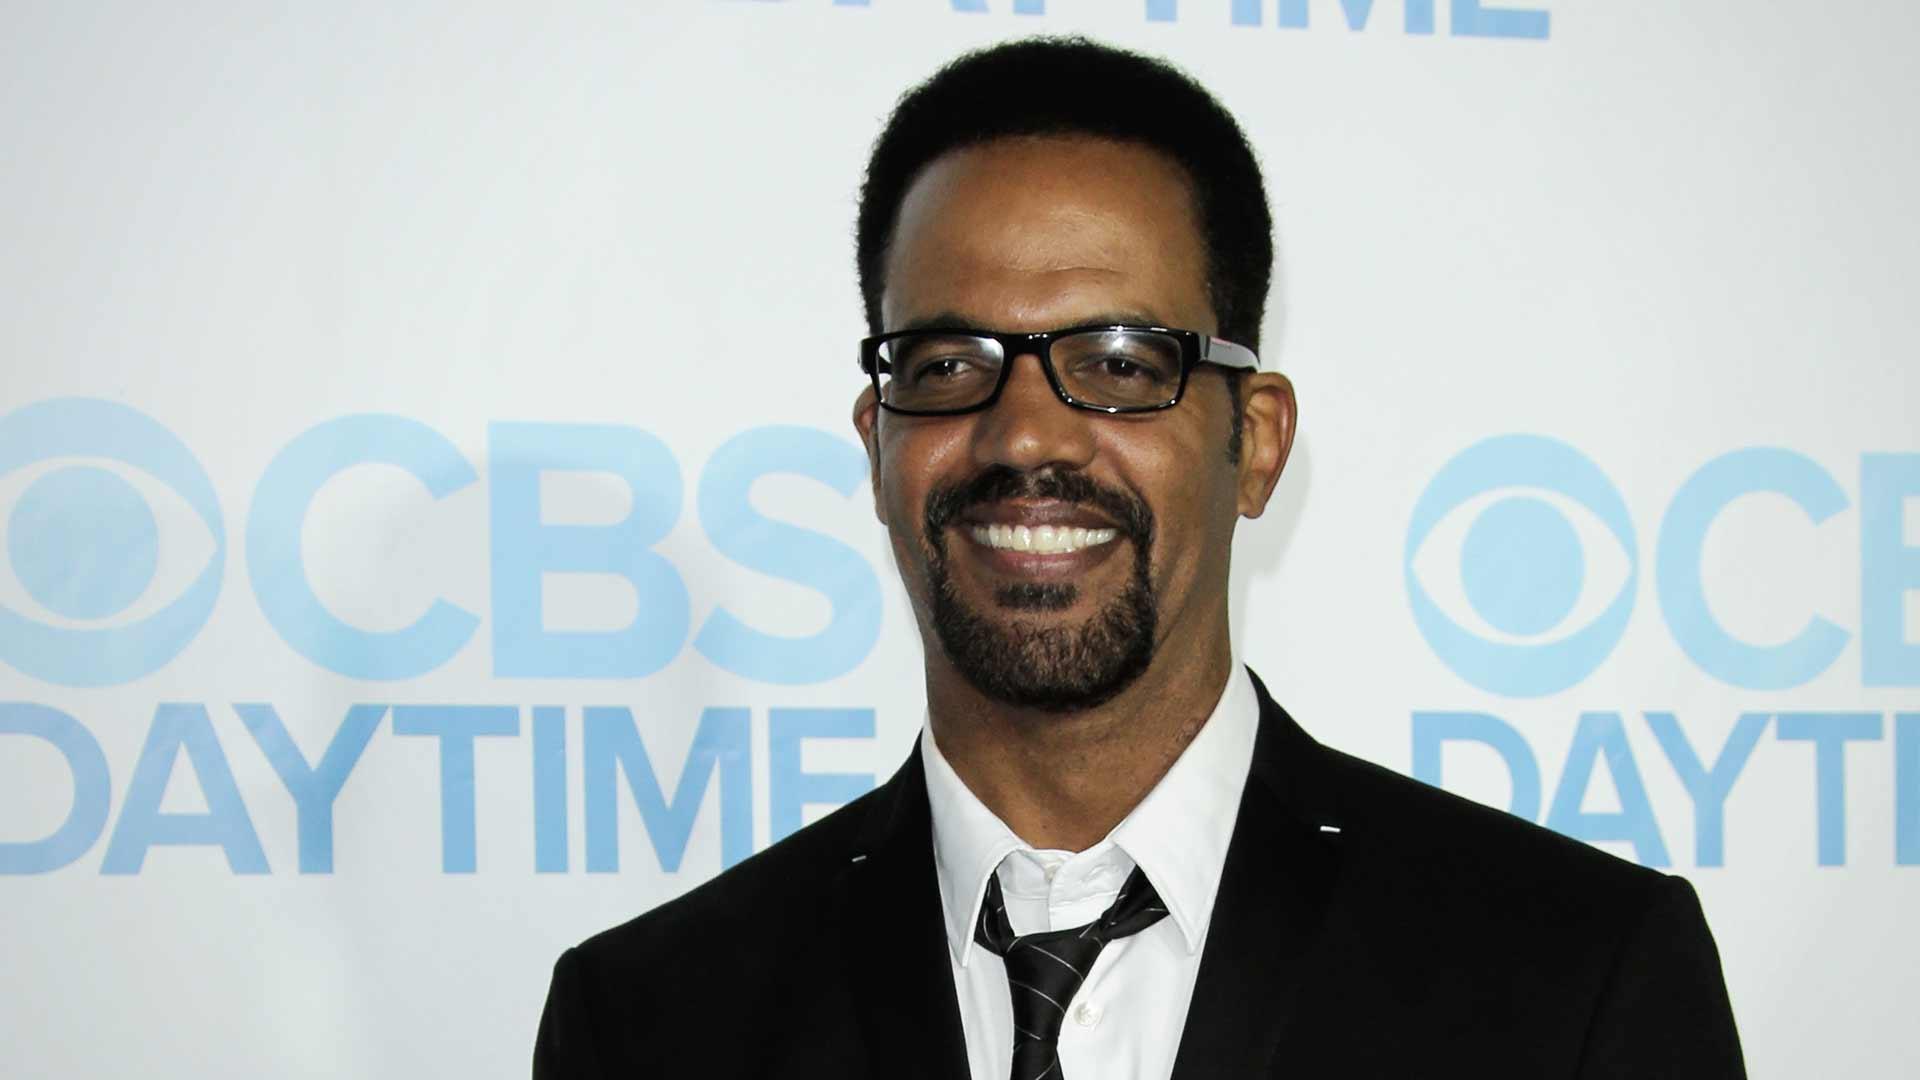 Kristoff St. John’s Father Reveals Surprise Handwritten Will Leaving All Money to Daughters